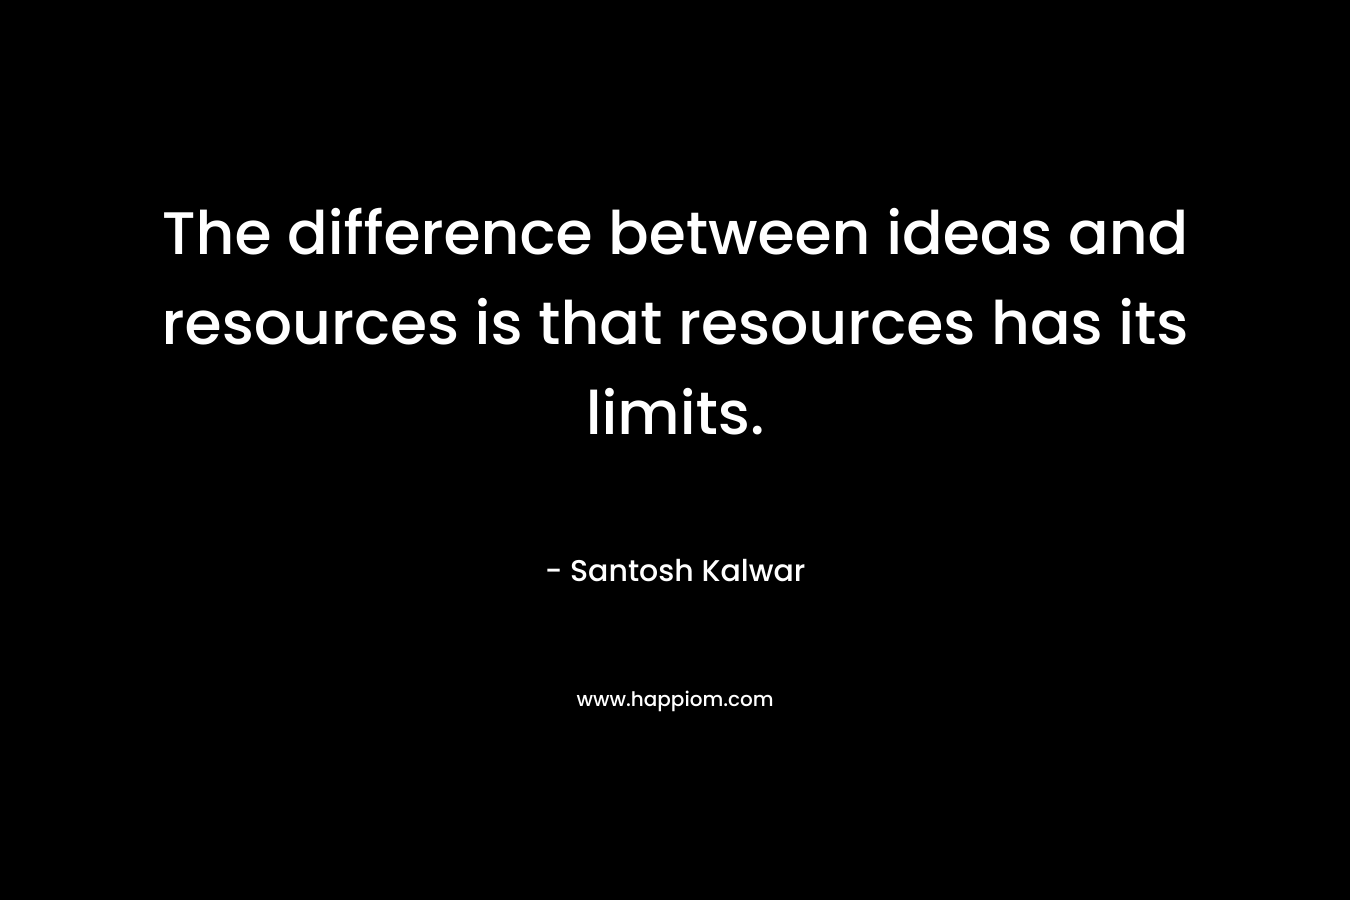 The difference between ideas and resources is that resources has its limits.